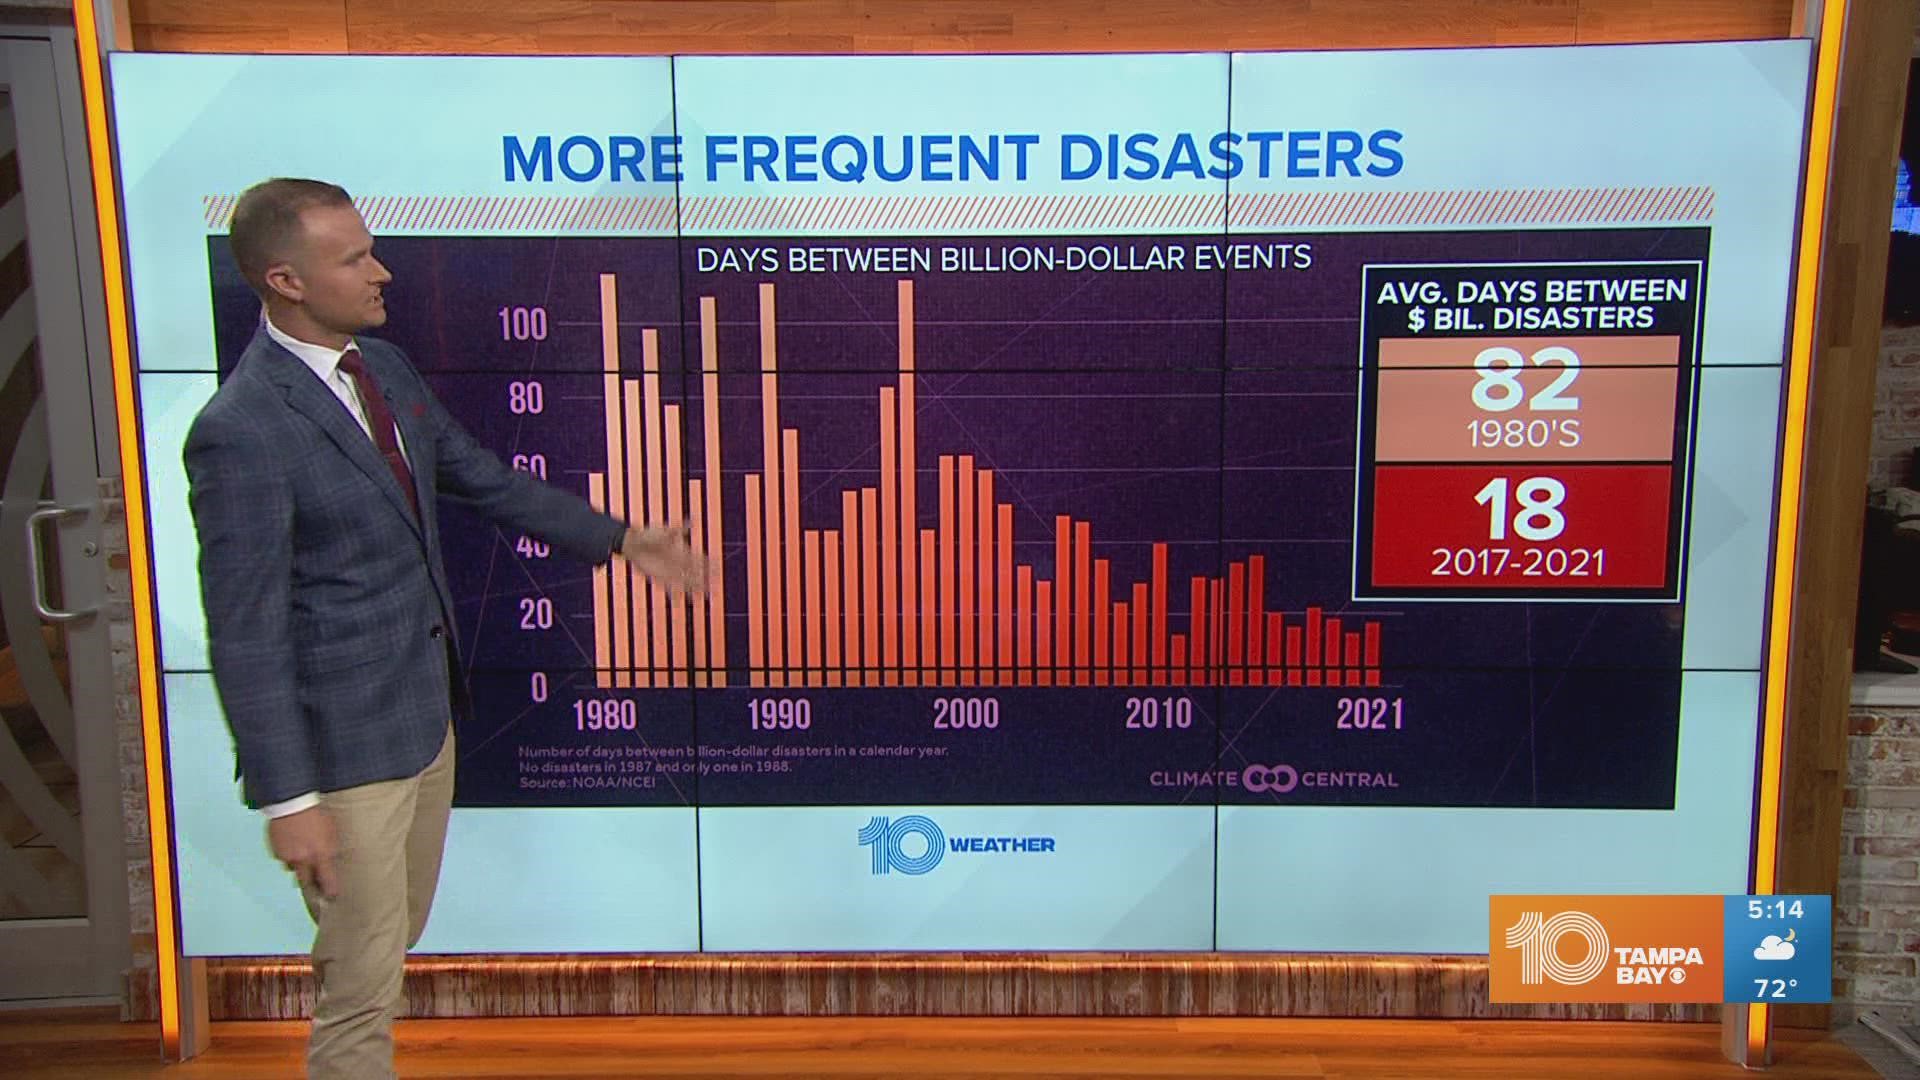 Hurricane Ian is just the latest billion-dollar disaster this year across the U.S. Grant Gilmore shows us how climate change is affecting the frequency of the events